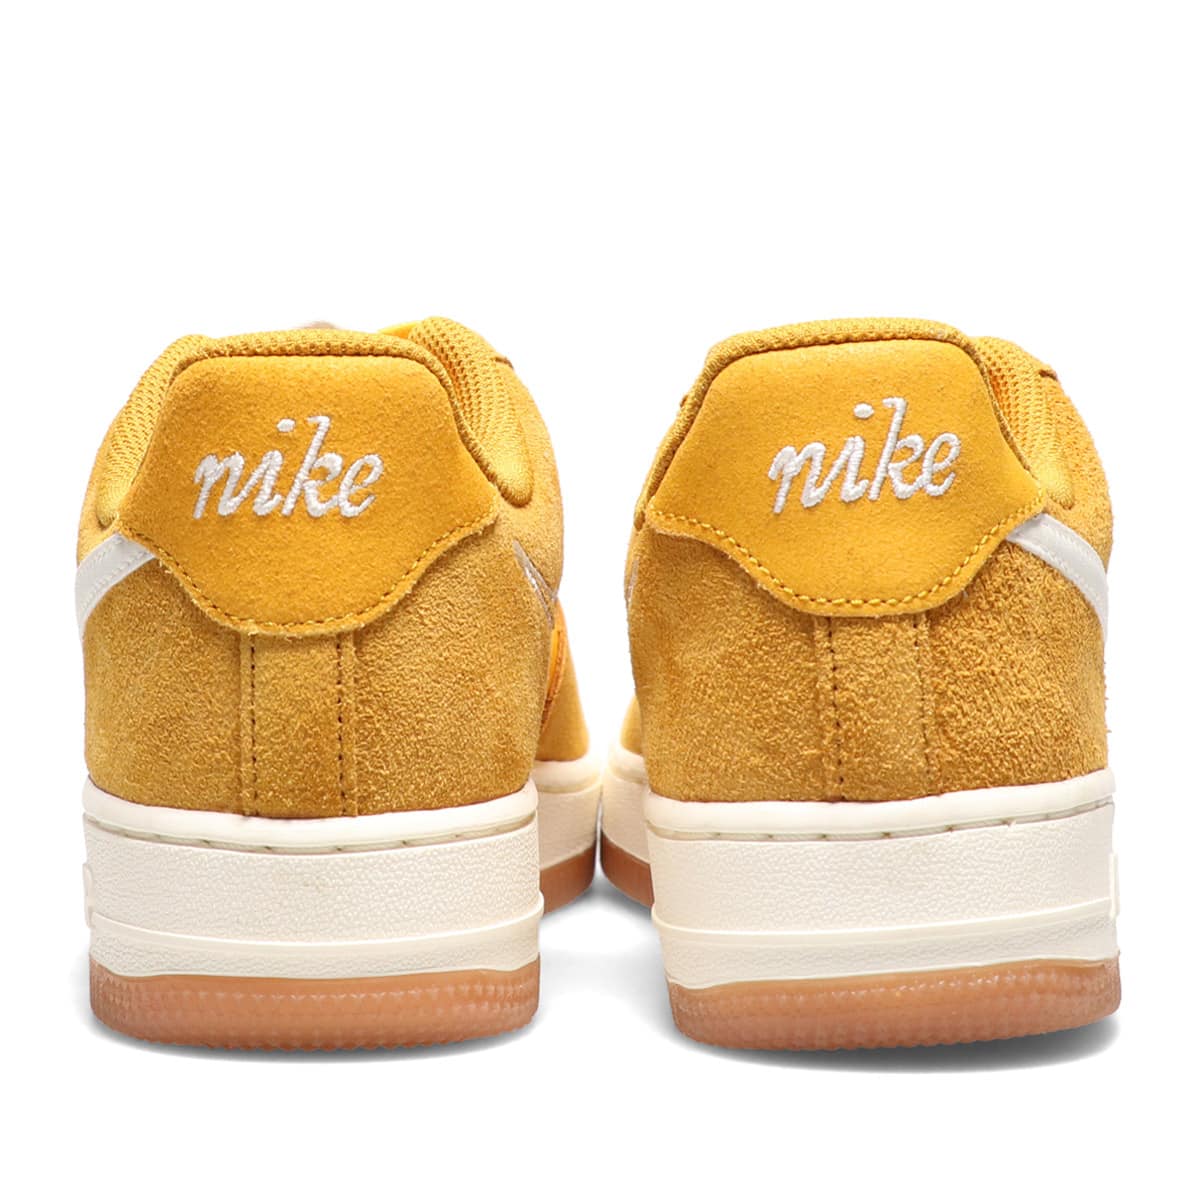 NIKE WMNS AIR FORCE 1 '07 SE GOLD SUEDE/SAIL-UNIVERSITY GOLD 21FA-I